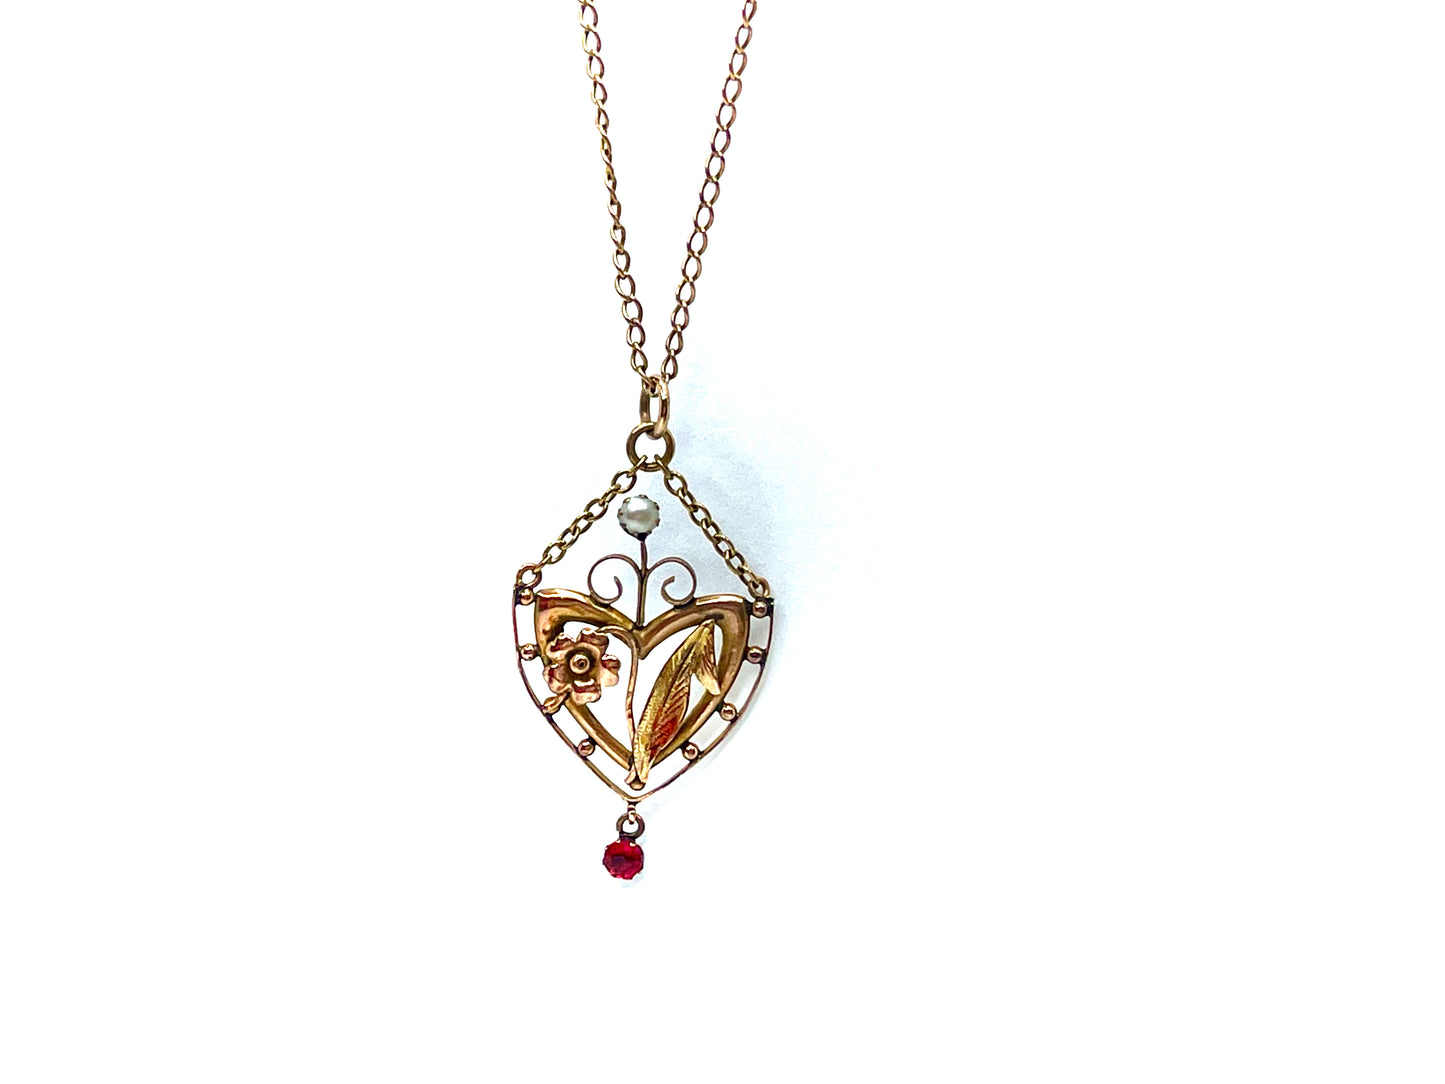 edwardian-9ct-gold-necklace-with-pendant